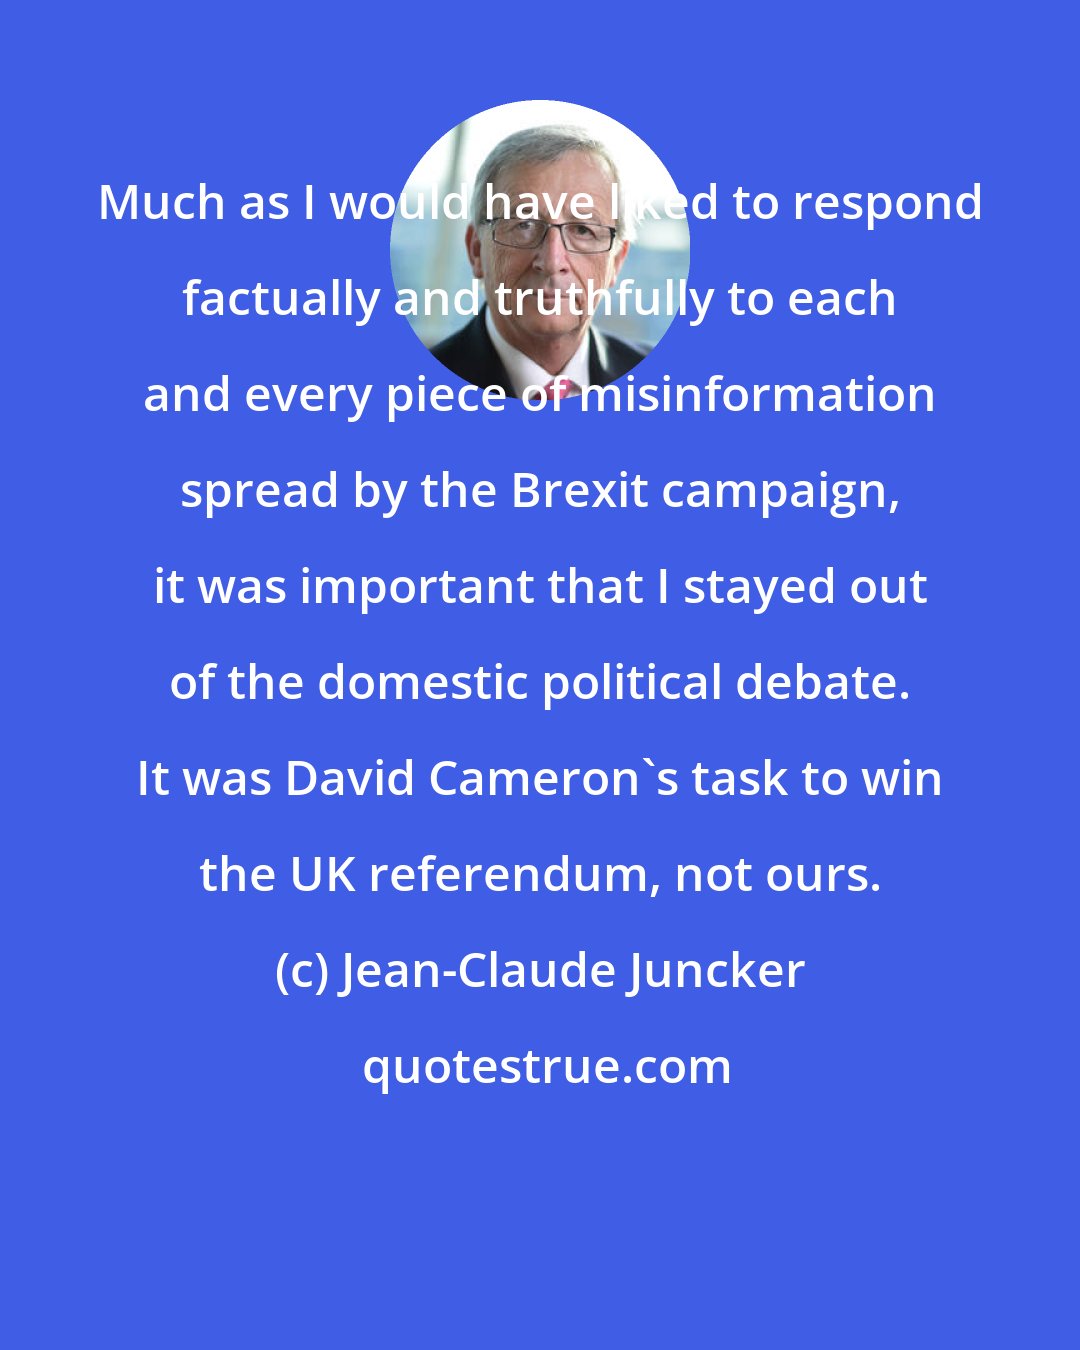 Jean-Claude Juncker: Much as I would have liked to respond factually and truthfully to each and every piece of misinformation spread by the Brexit campaign, it was important that I stayed out of the domestic political debate. It was David Cameron's task to win the UK referendum, not ours.